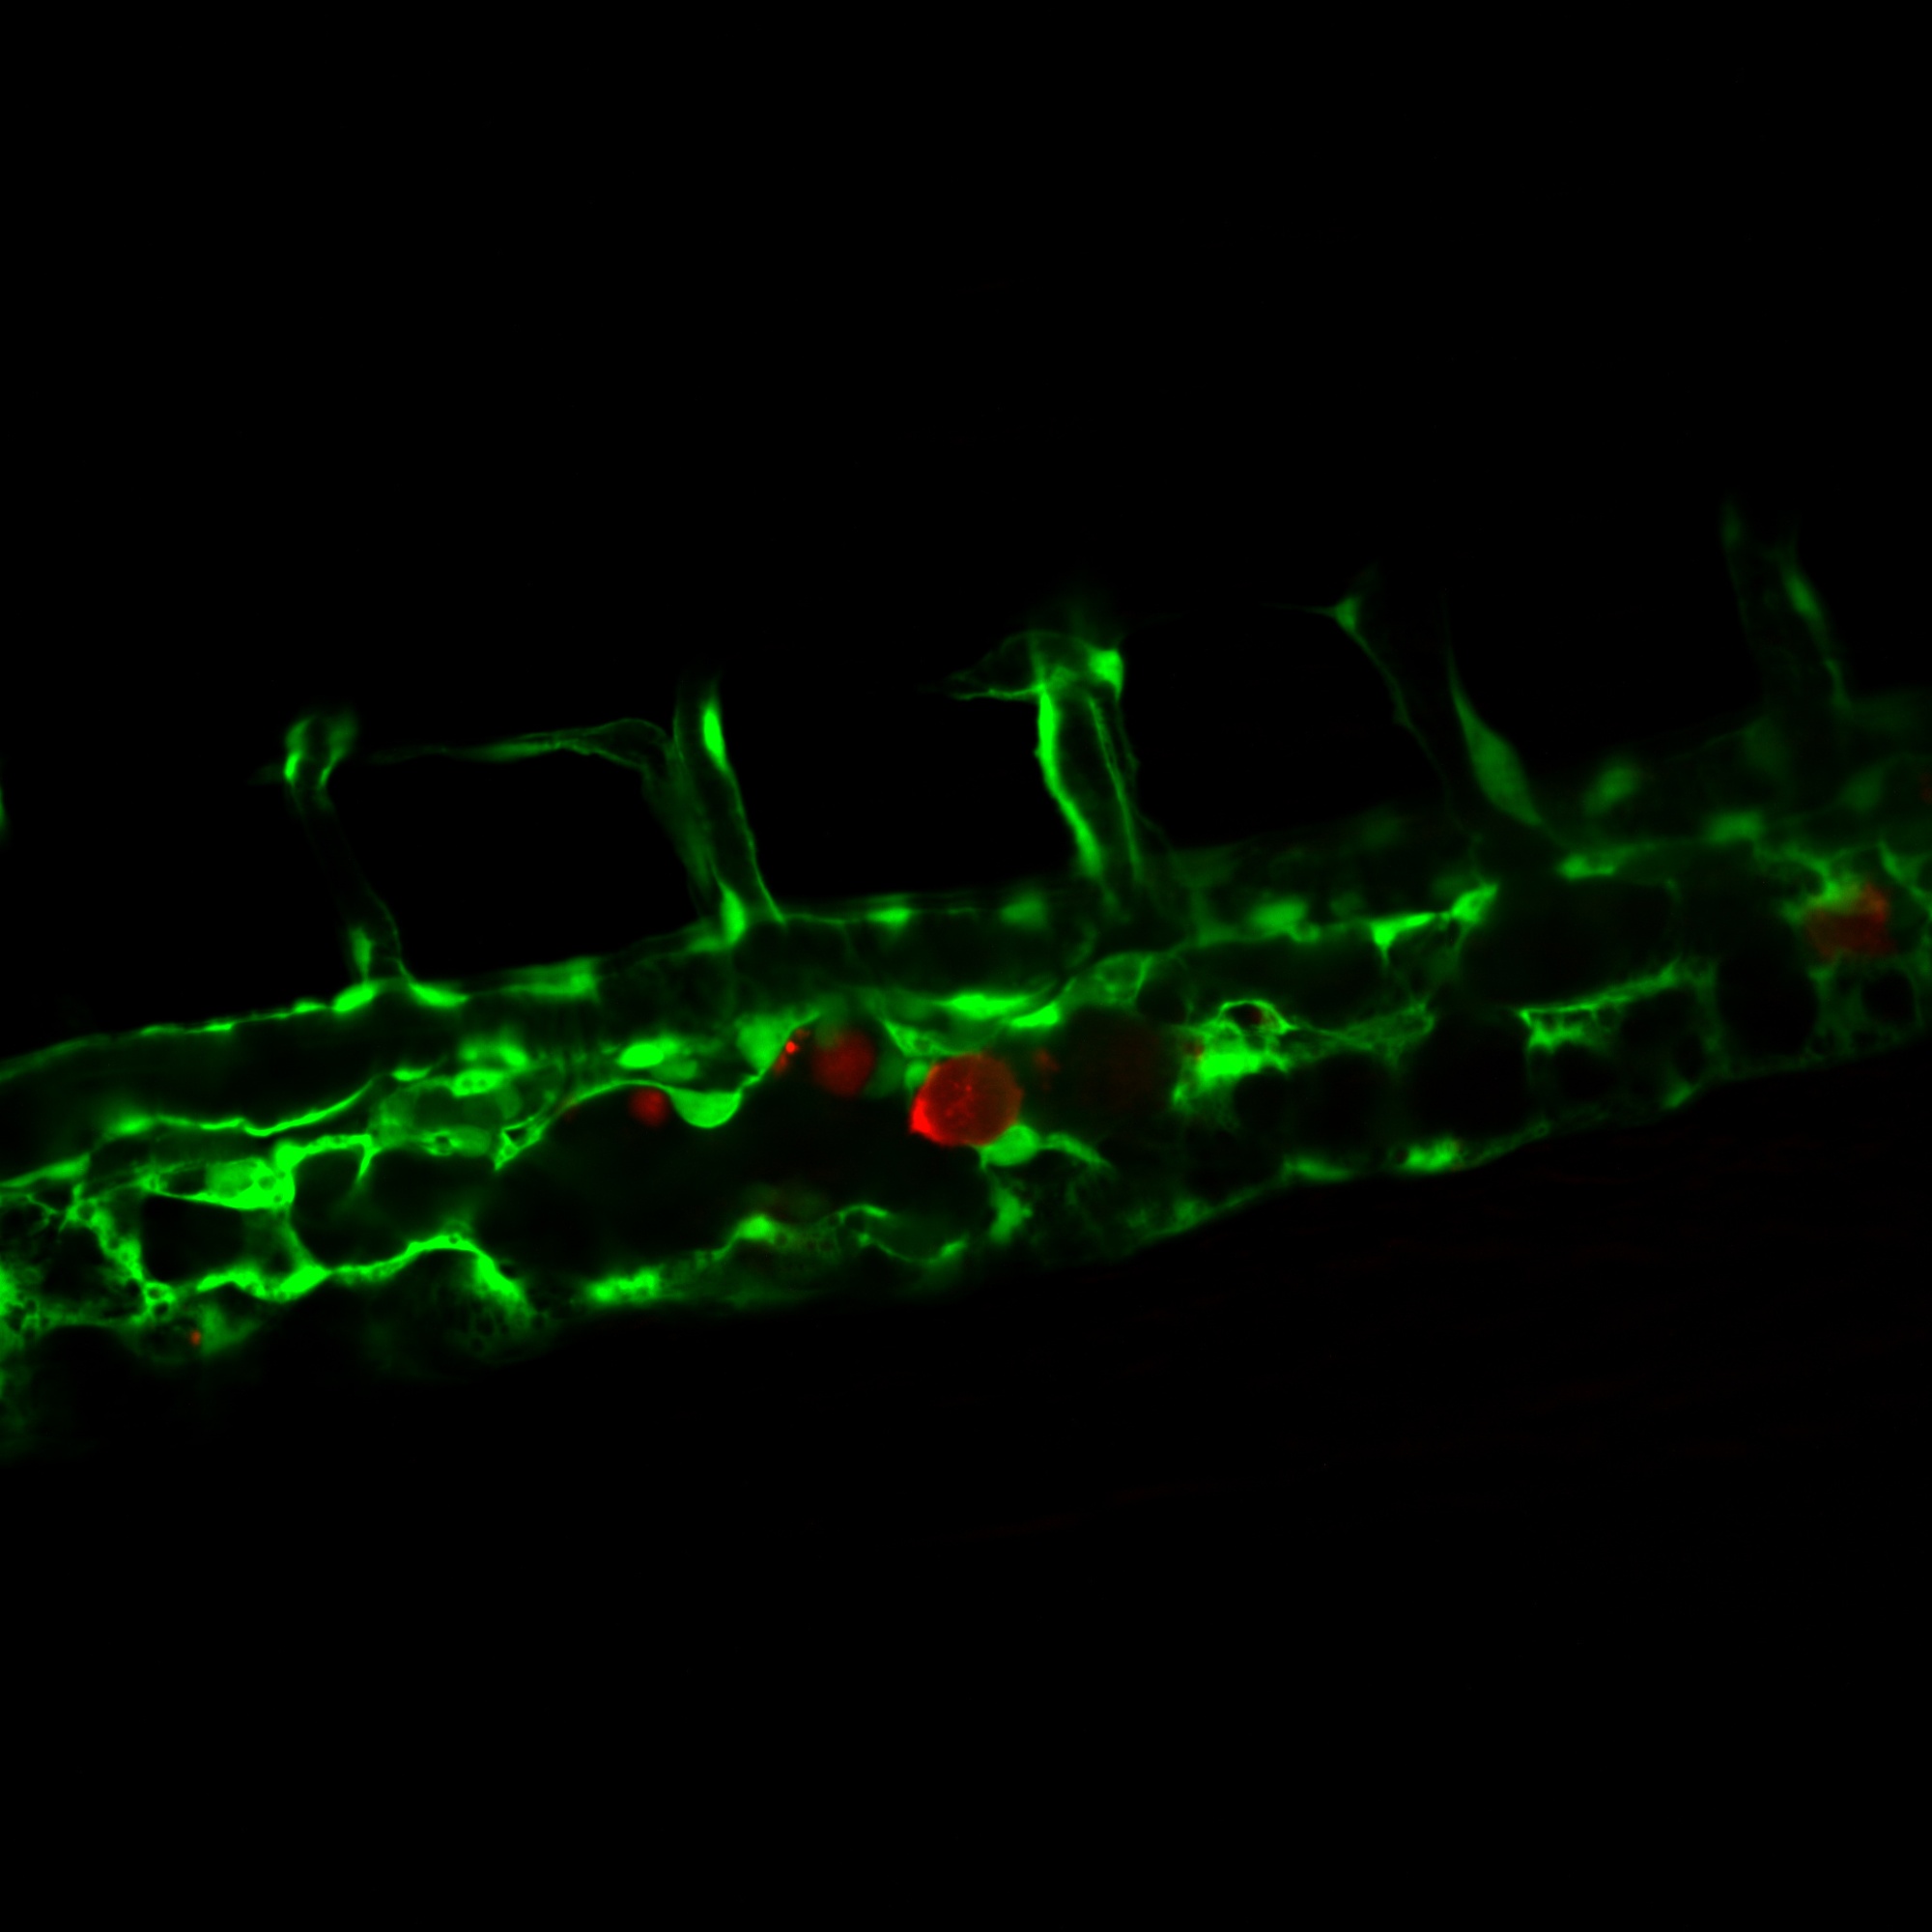 cancer cells (red) migrating inside the blood vessel of a living zebrafish embryo (green). Credit Ilkka Paatero and Guillaume Jacquemet.